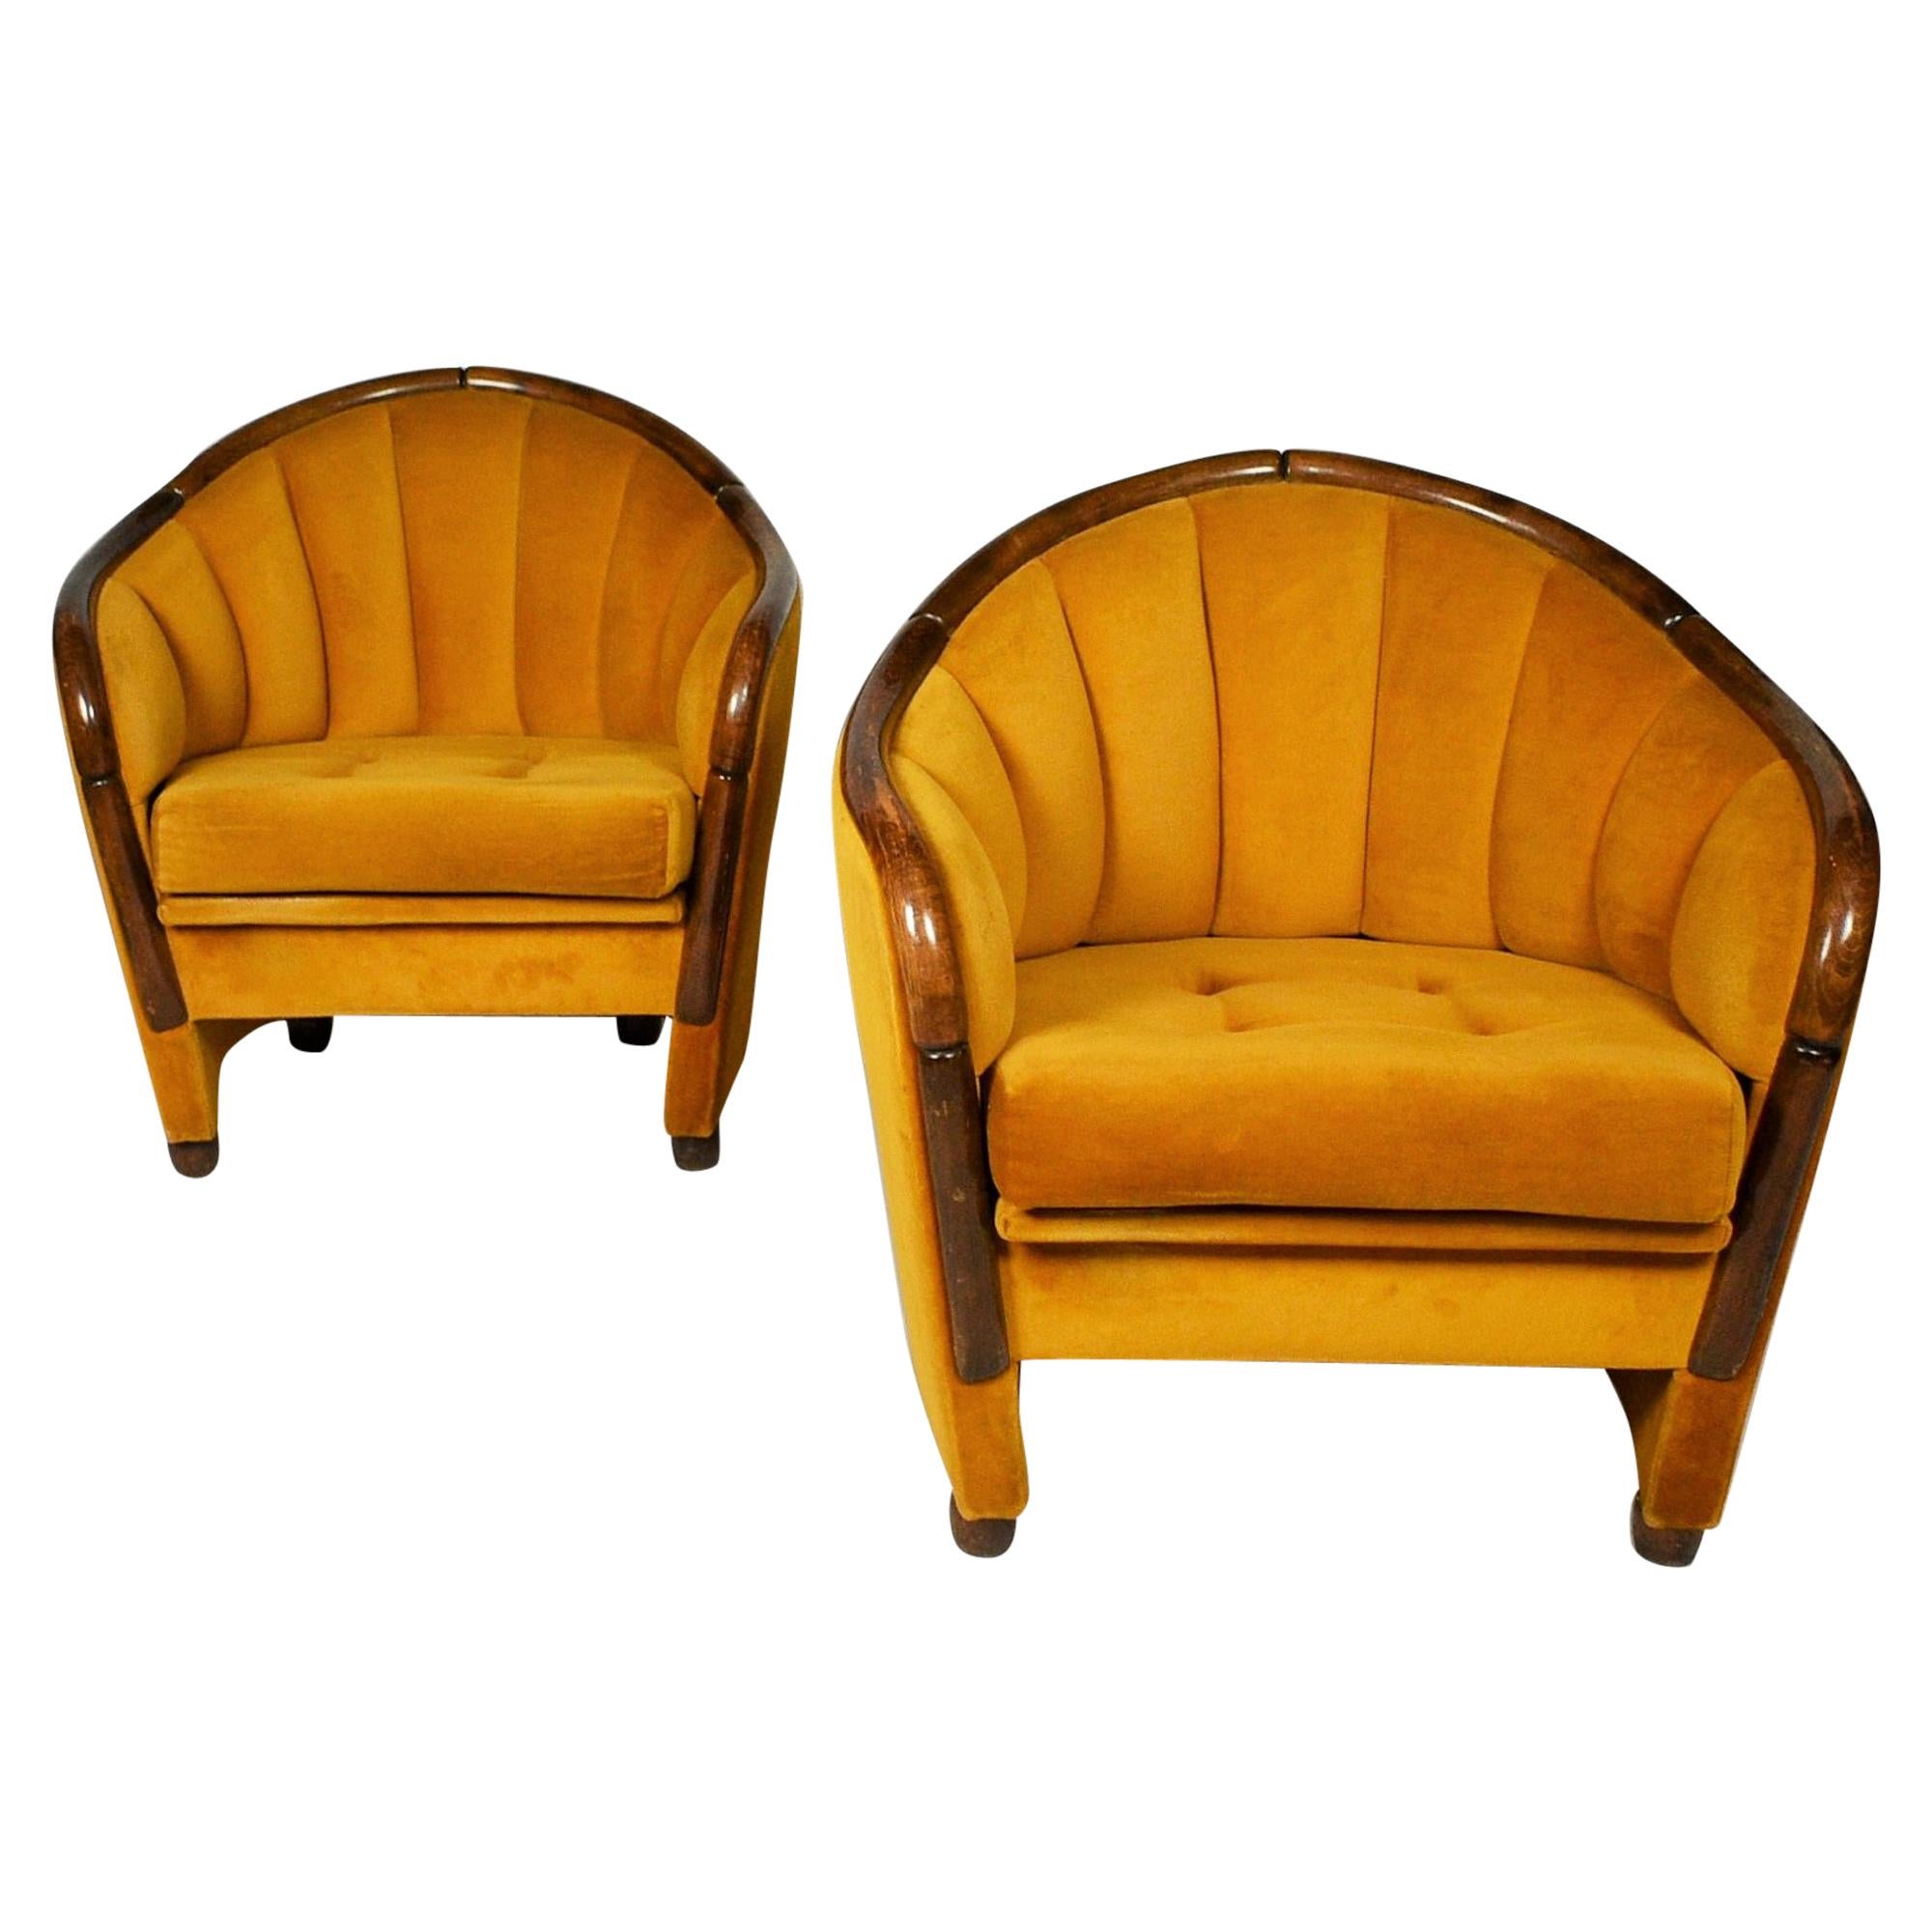 Italian Armchairs in the Style of Gio Ponti, 1950s